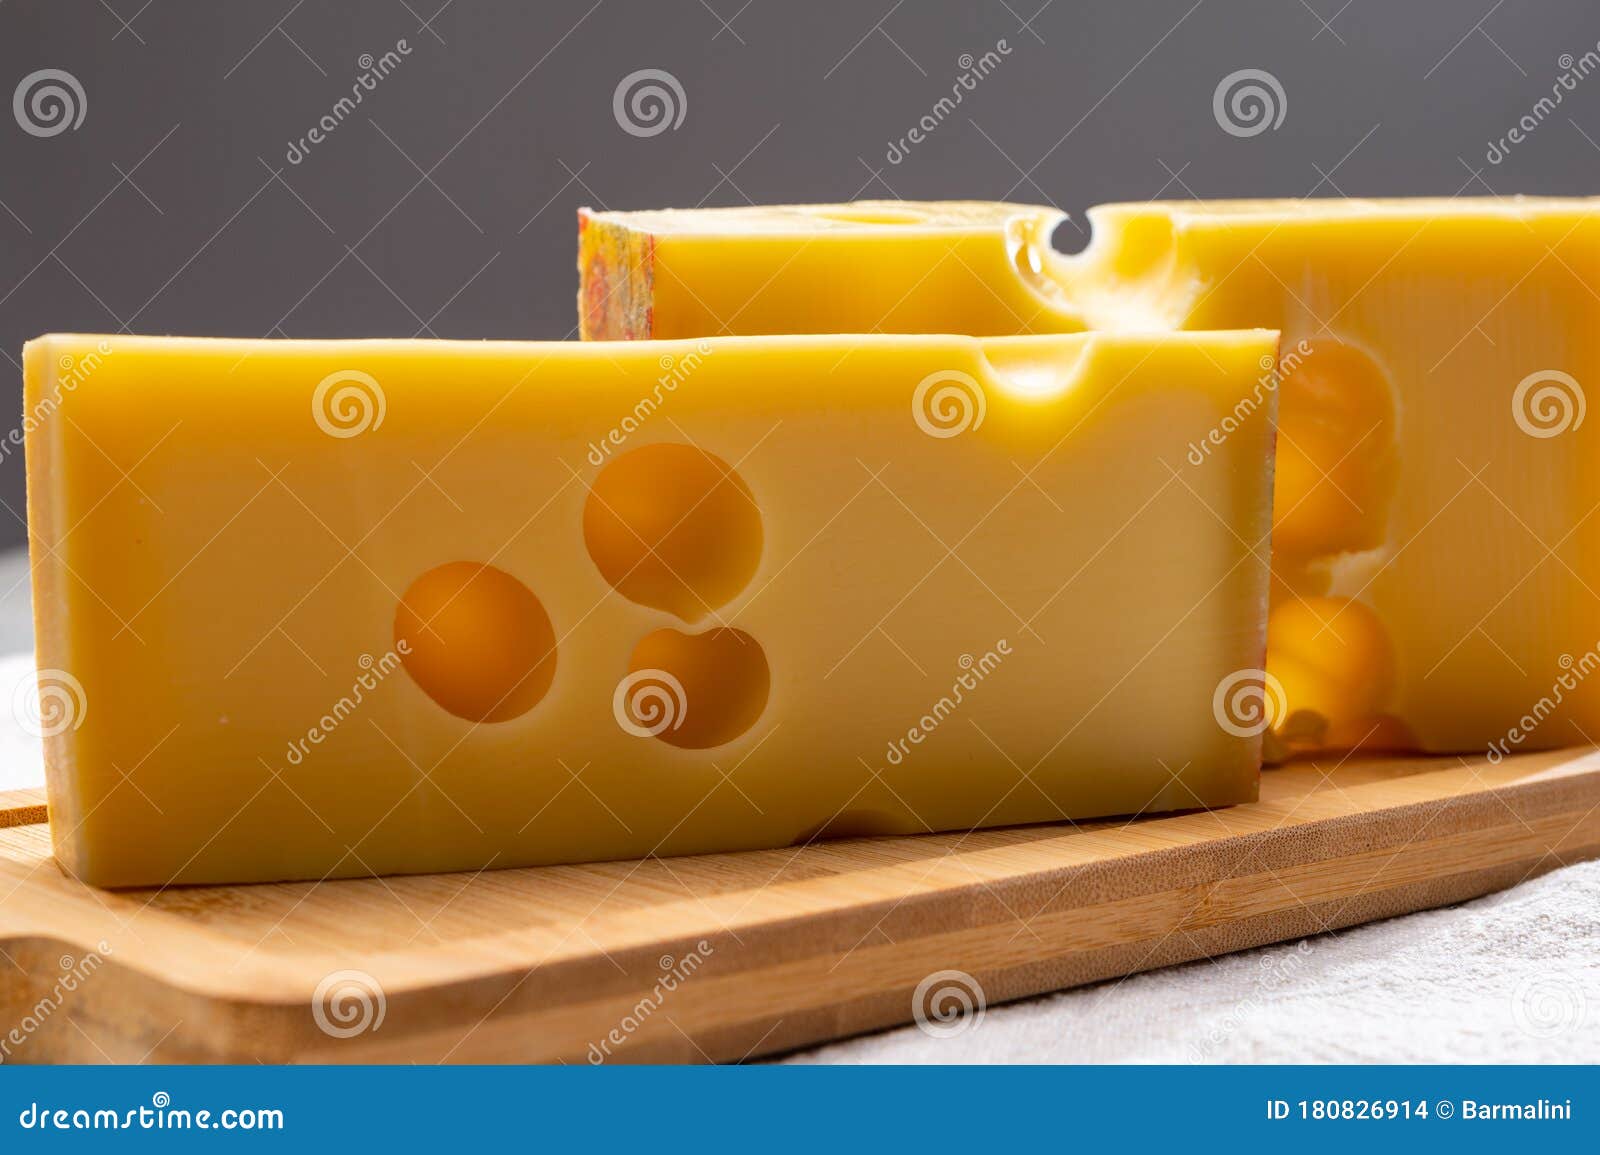 Block Of Swiss Medium Hard Yellow Cheese Emmental Or Emmentaler With Round Holes Stock Photo Image Of Piece Gourmet 180826914,White Asparagus Vs Green